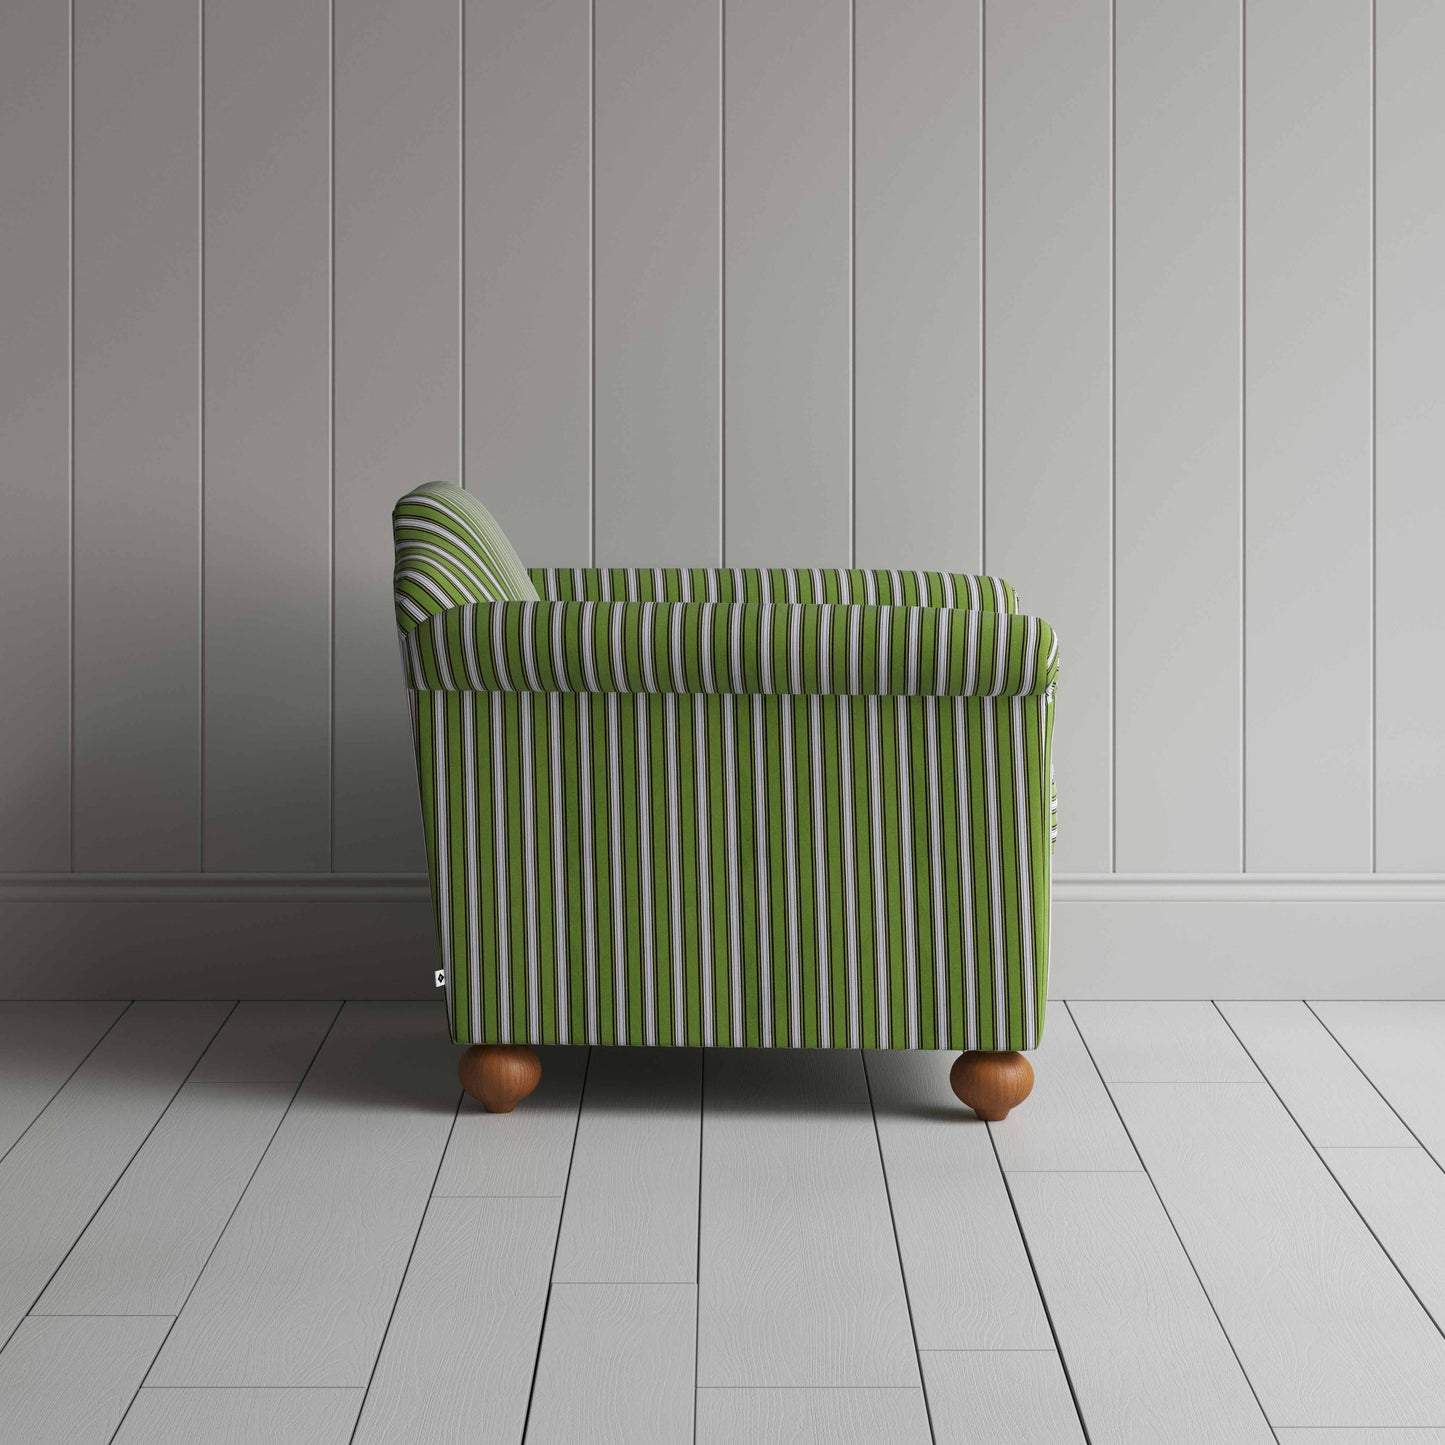 Dolittle Armchair in Colonnade Cotton, Green and Wine